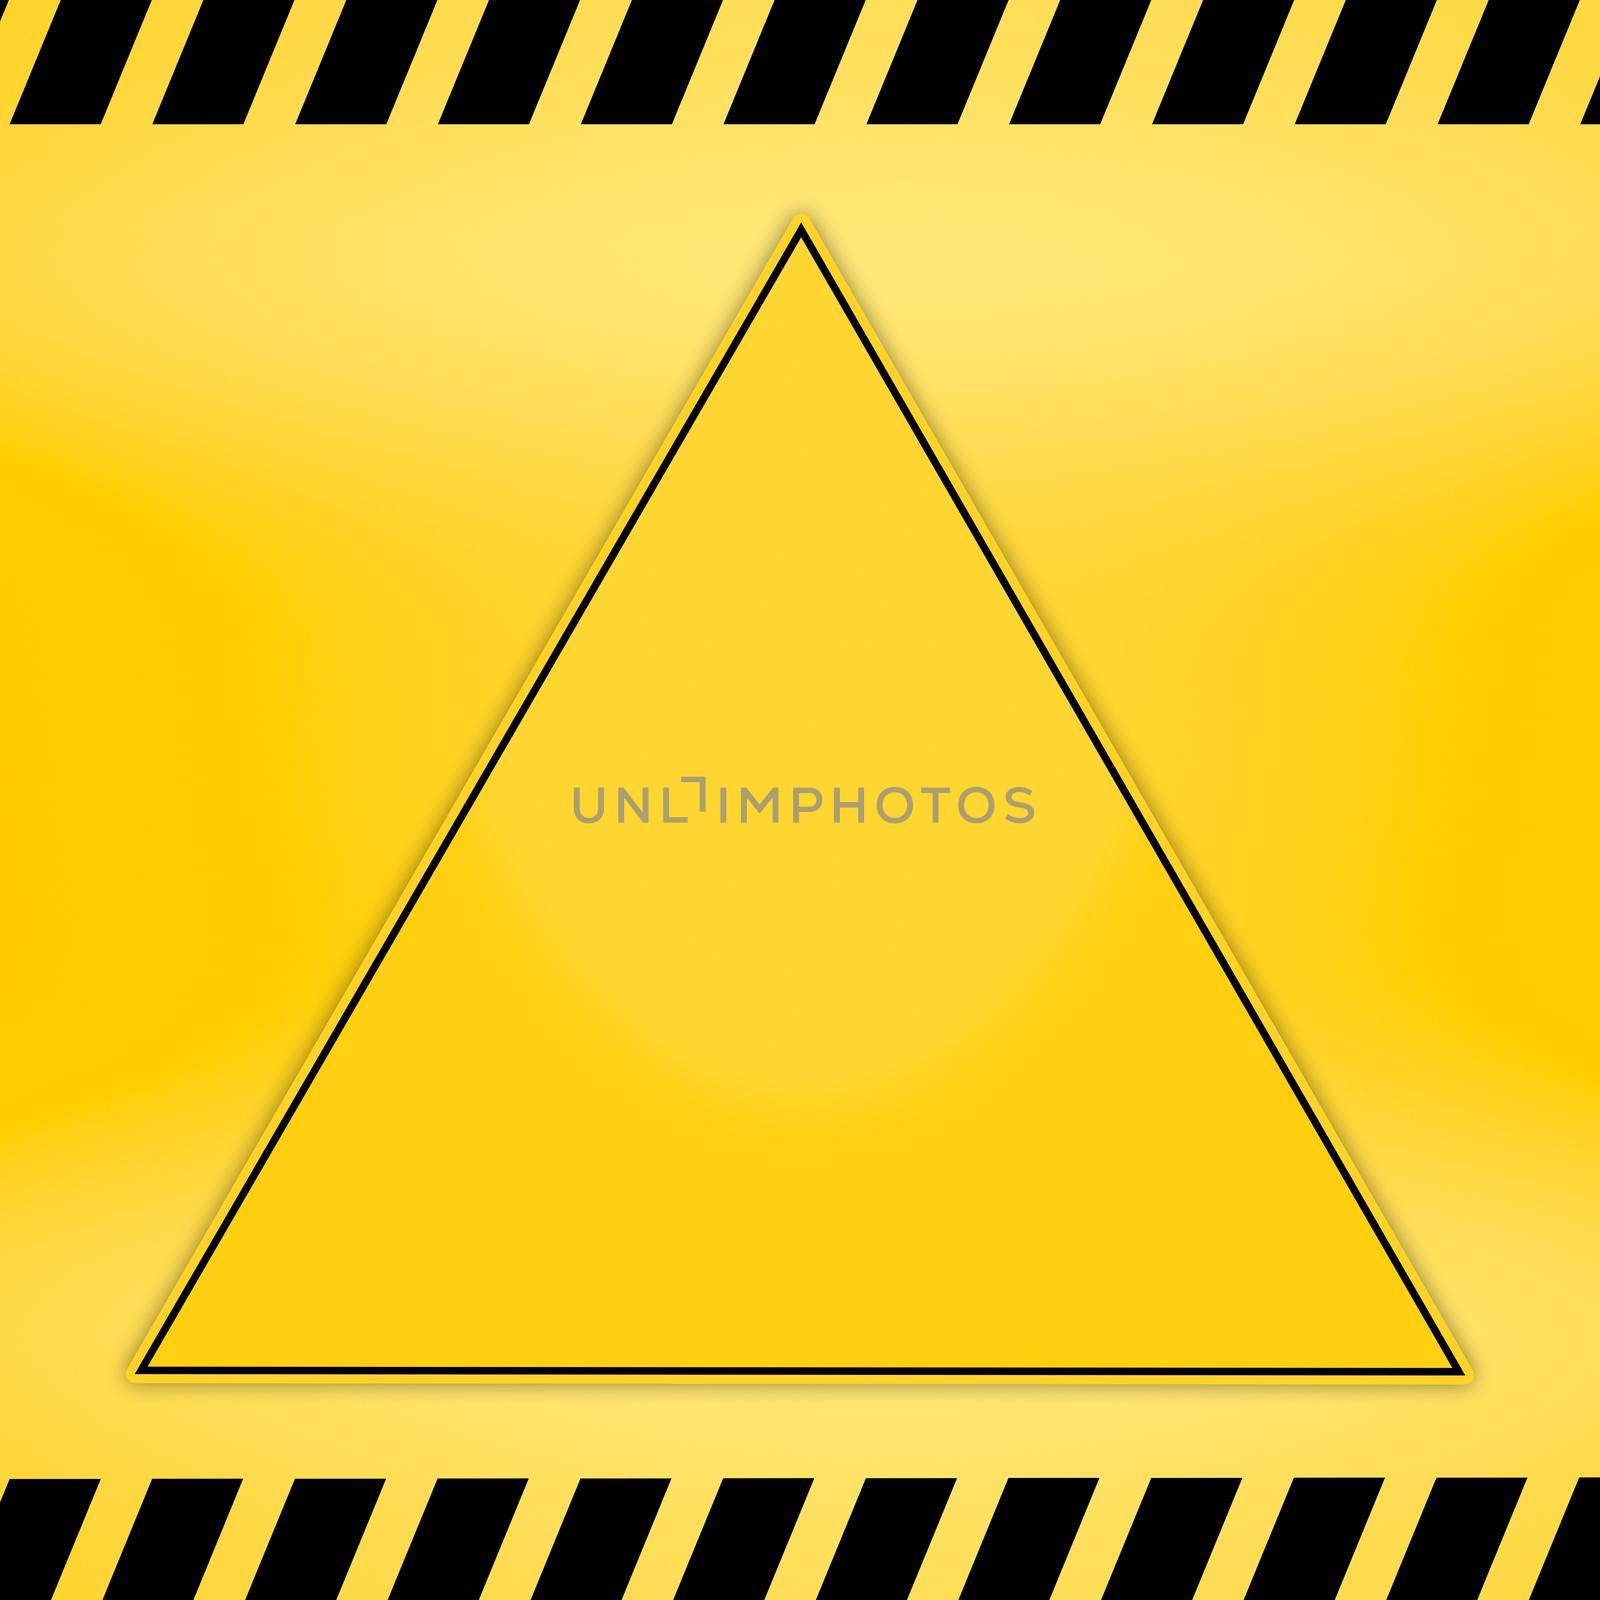 Caution lines backgrounds Worn hazard stripes Warning tapes Danger signs